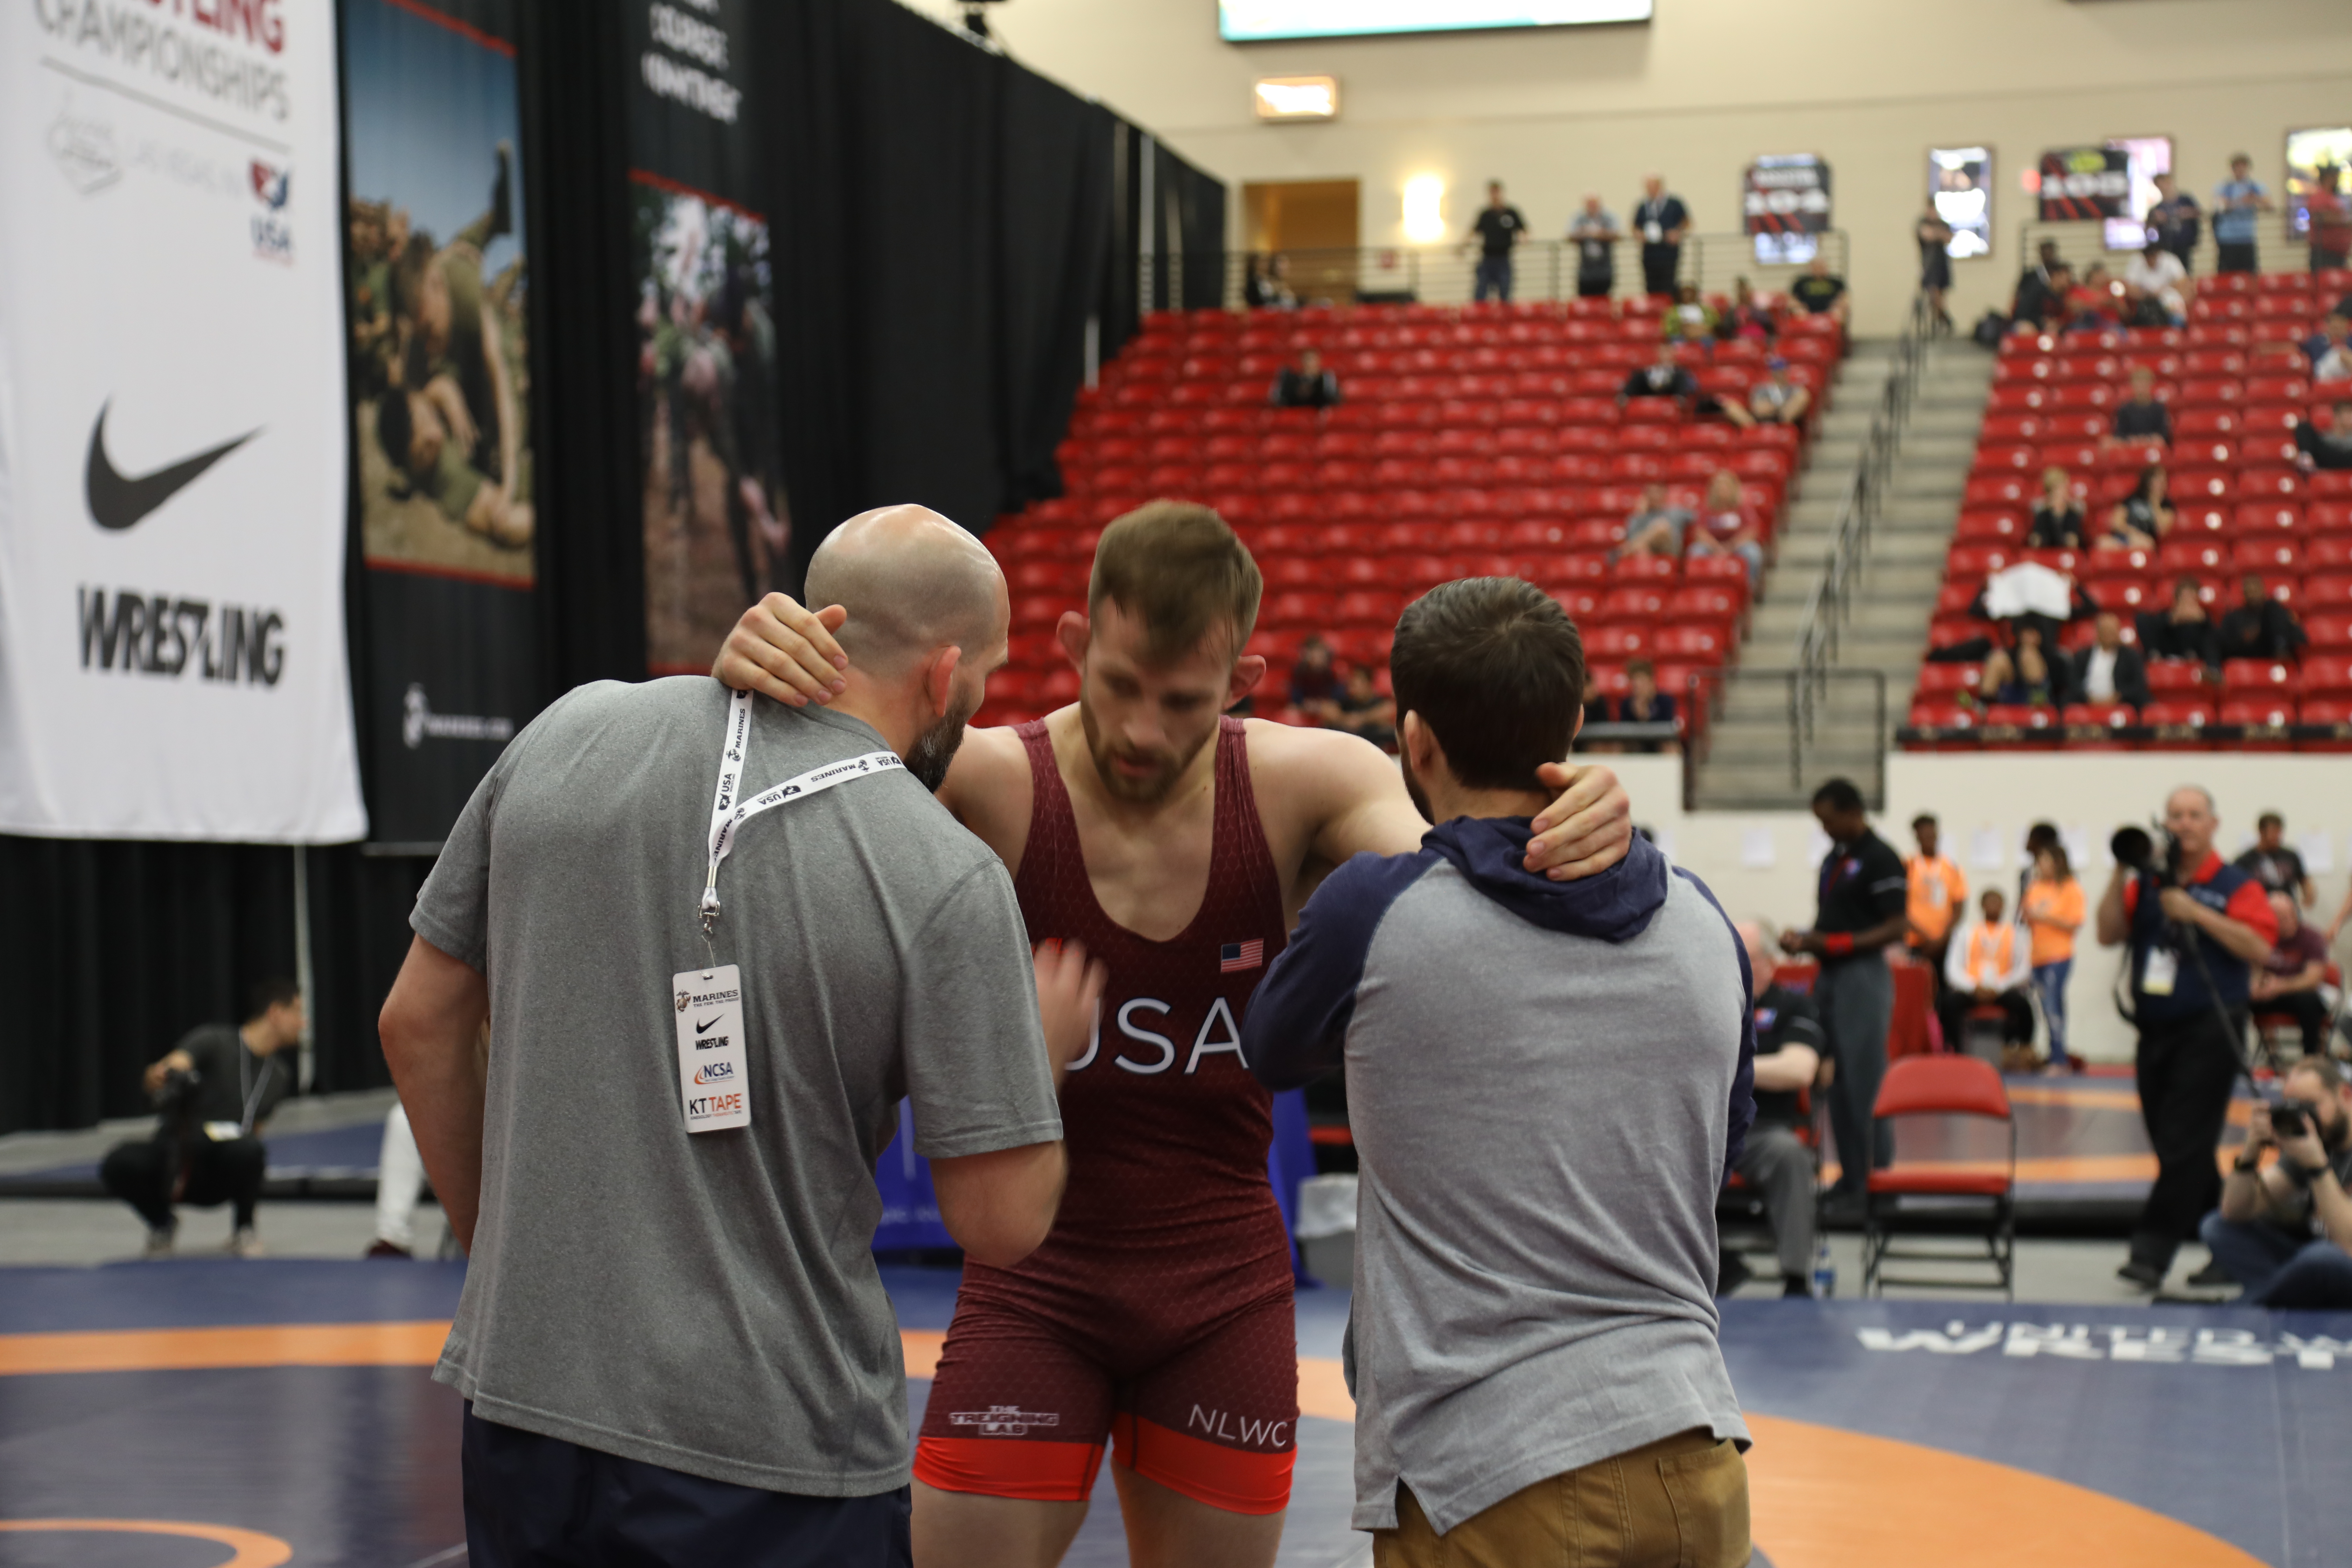 3 NLWC Wrestlers Win Gold at Pan American Championships